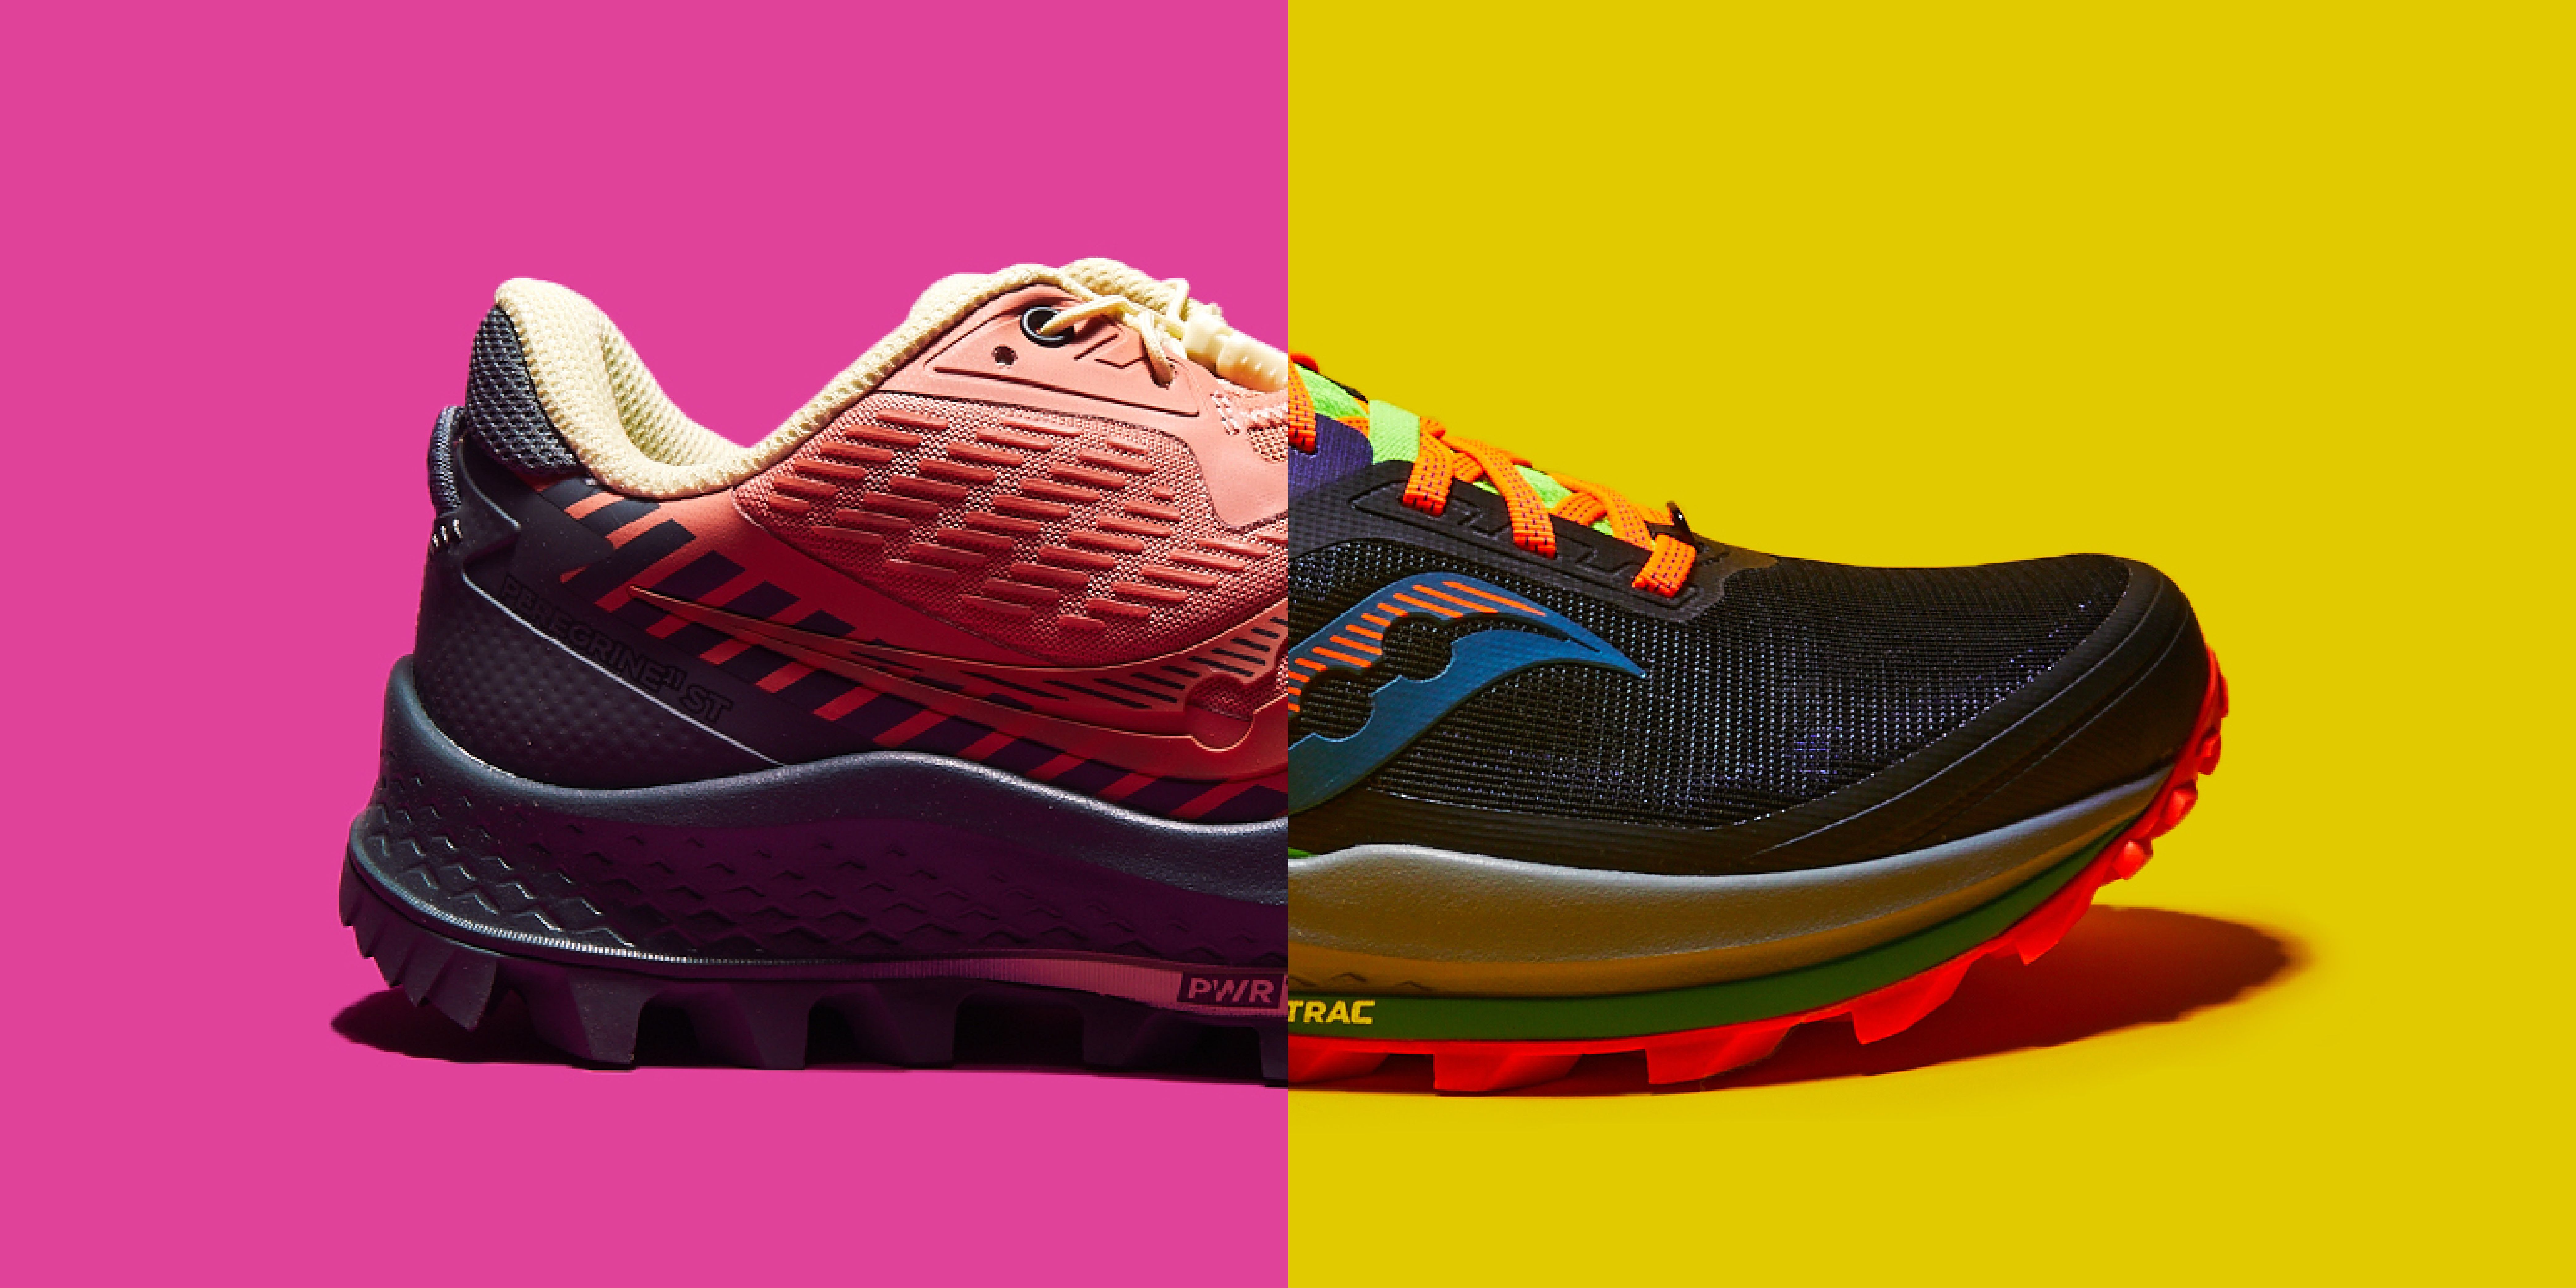 Which Types of Saucony Are Their Trail Running Shoes?